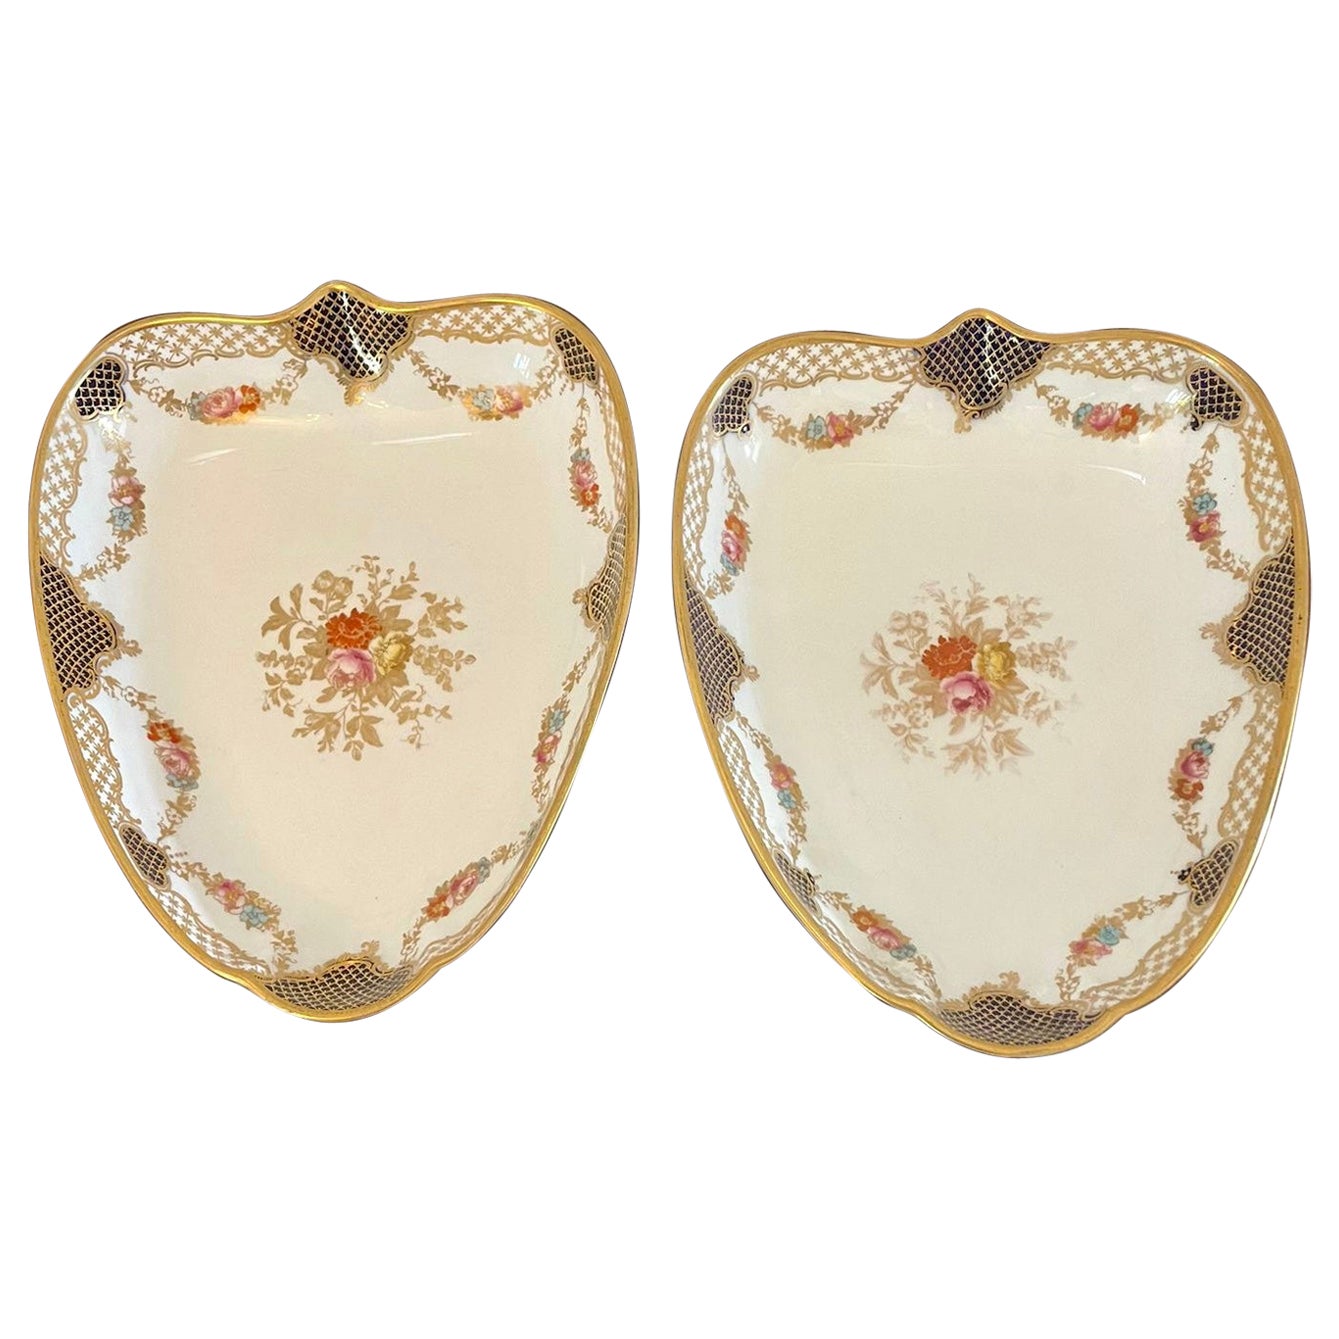 Superb Quality Pair of Antique Edwardian Hand Painted Wedgwood Shaped Dishes For Sale